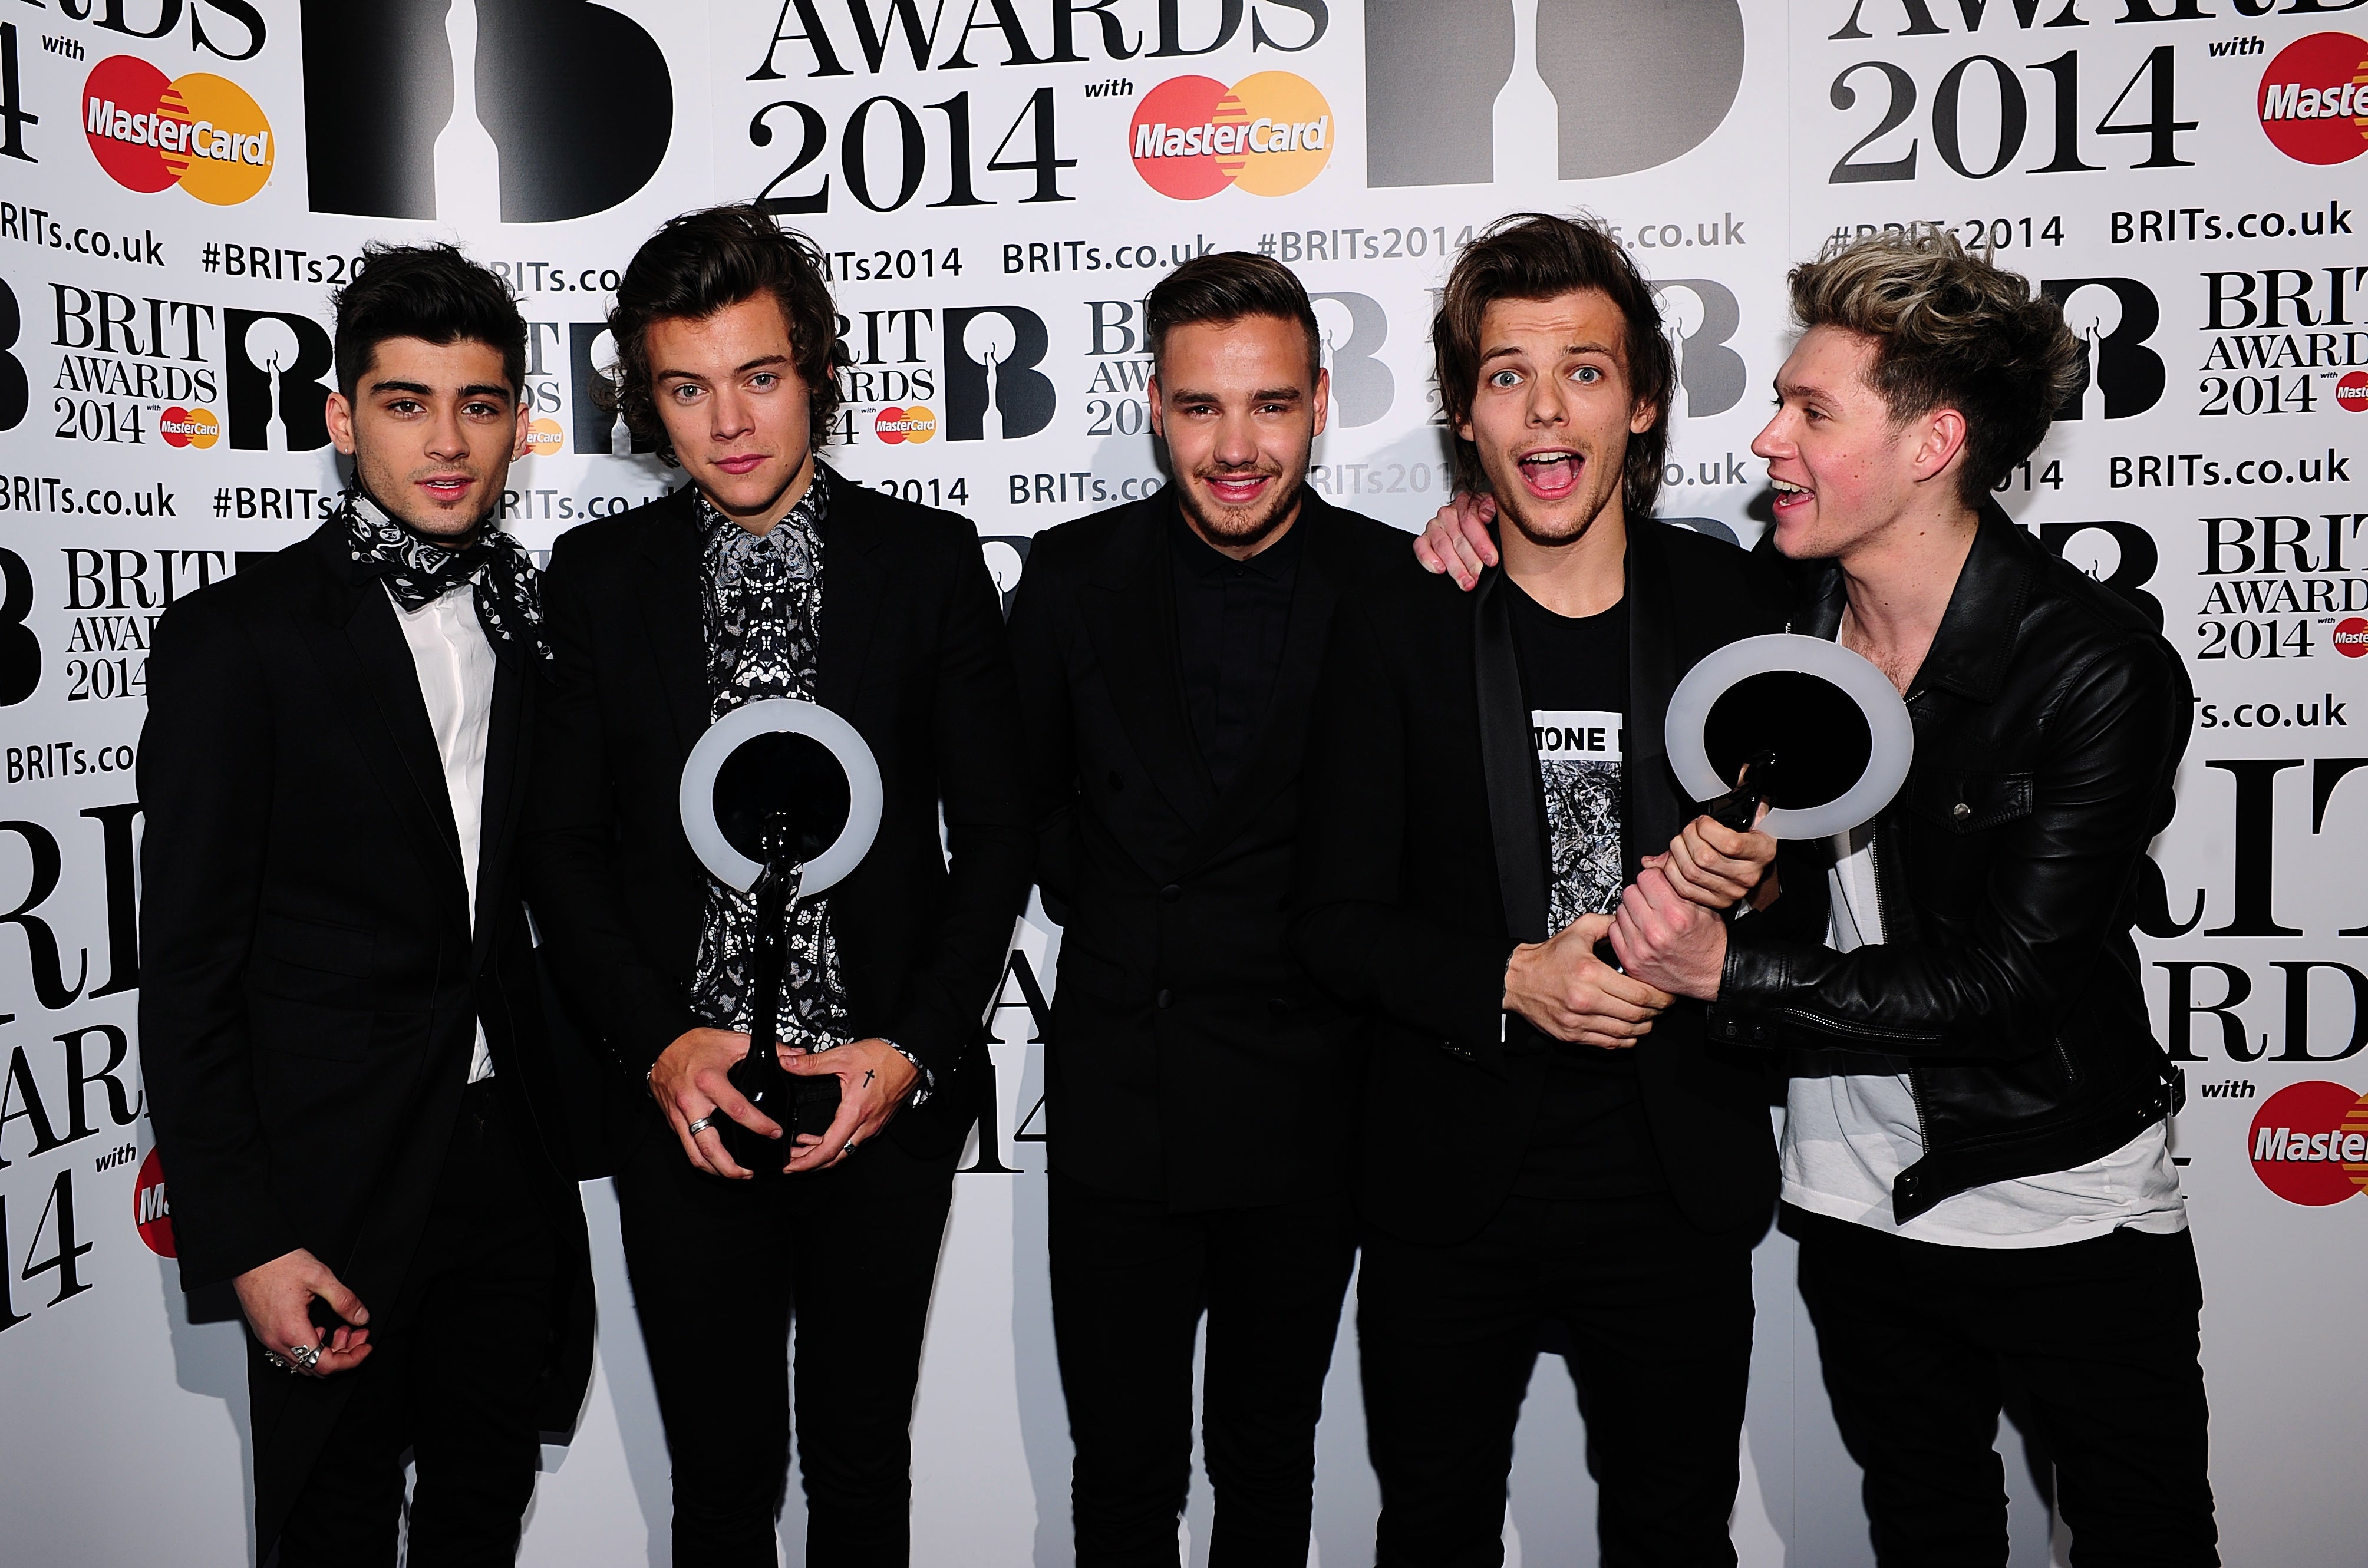 Zayn Malik, Harry Styles, Liam Payne, Louis Tomlinson and Nial Horan from One Direction at the 2014 Brit Awards (Ian West/PA)